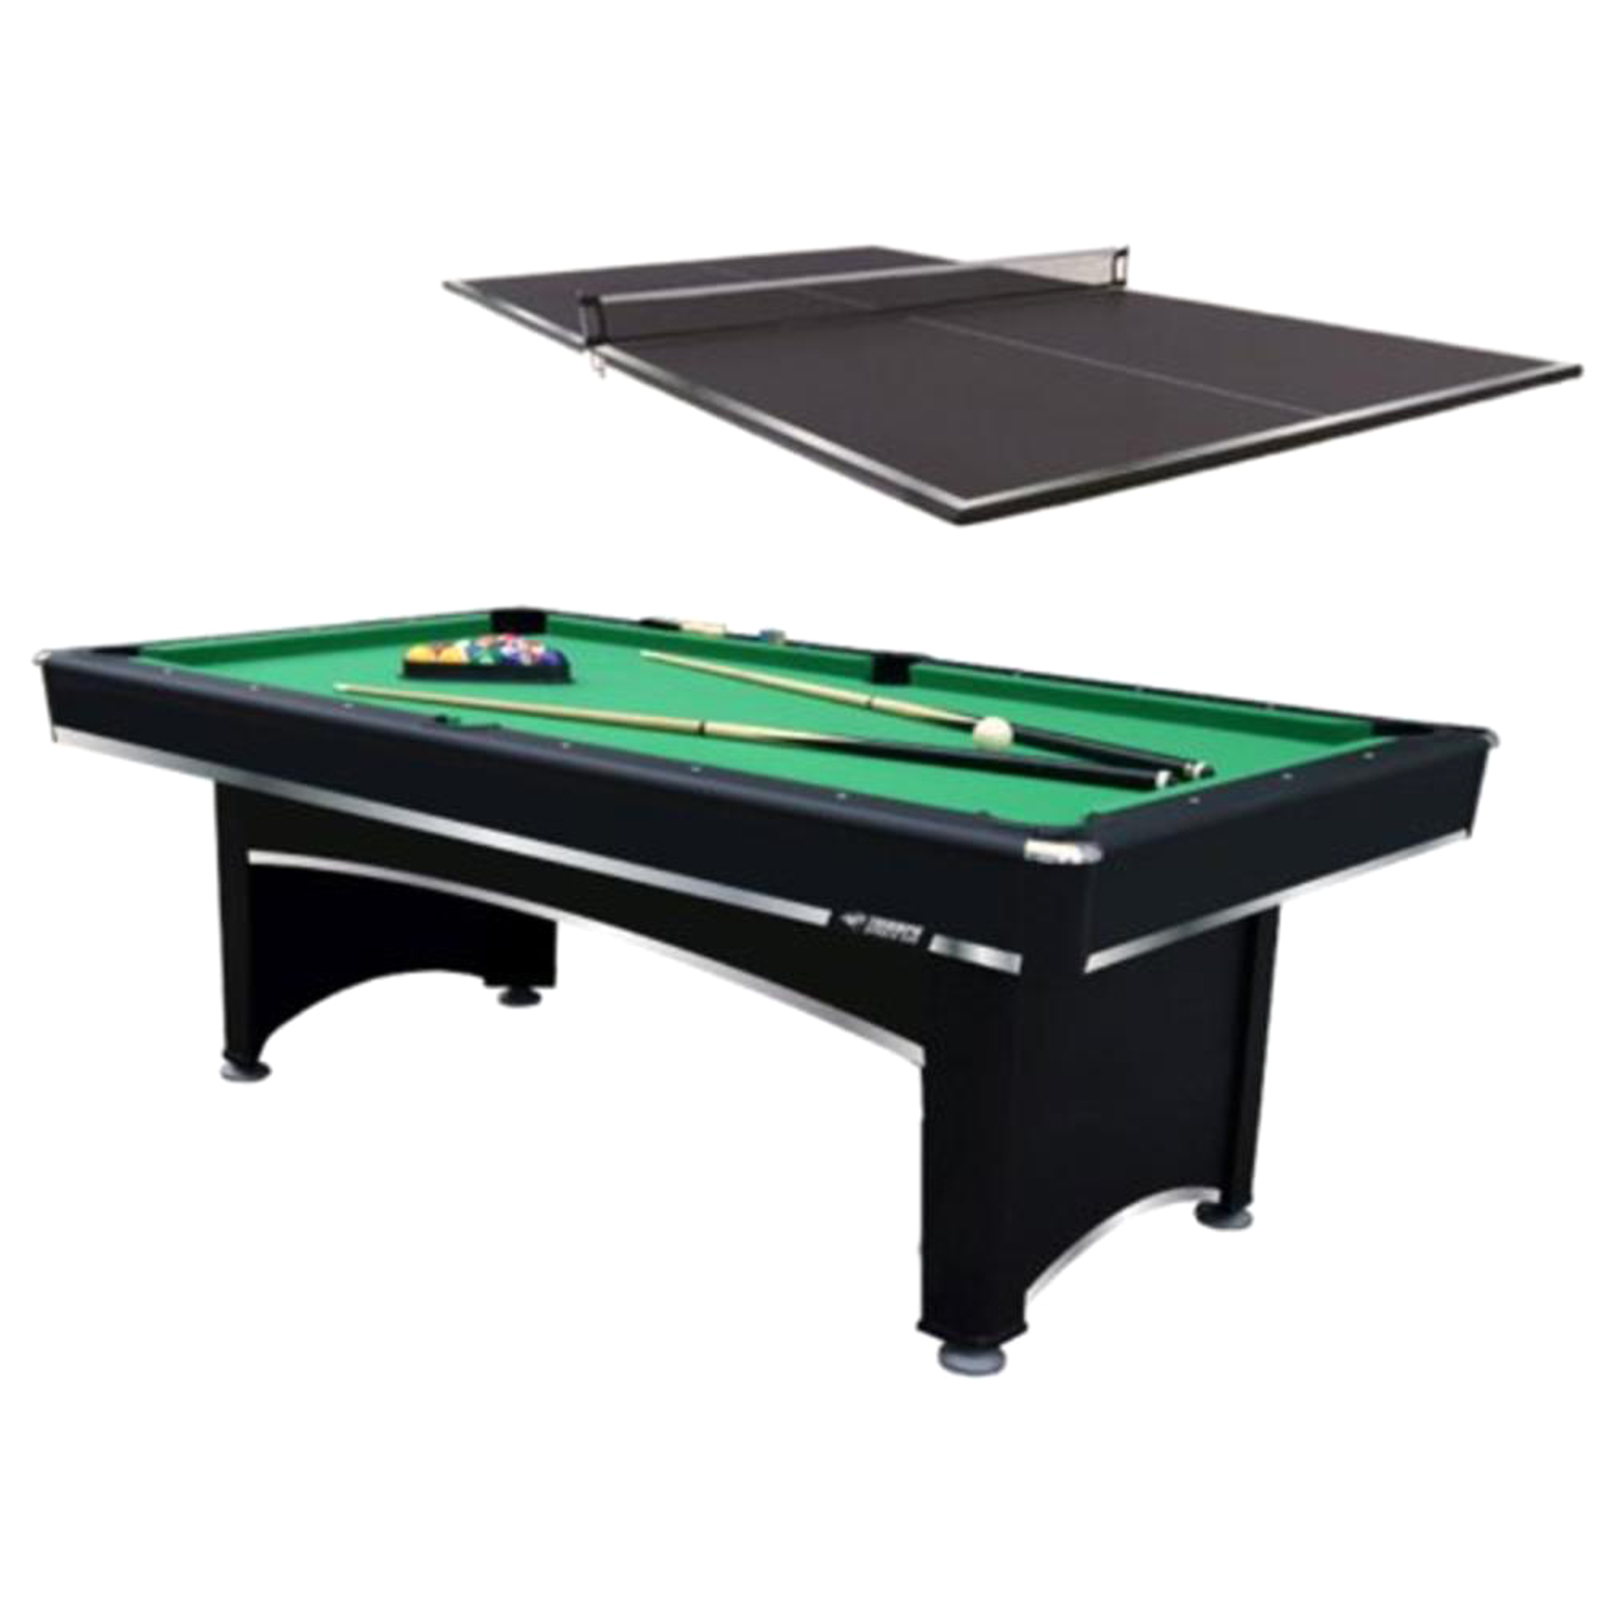 Overtime 45-6102 84" Arcade  Billiard Table with Table Tennis Top